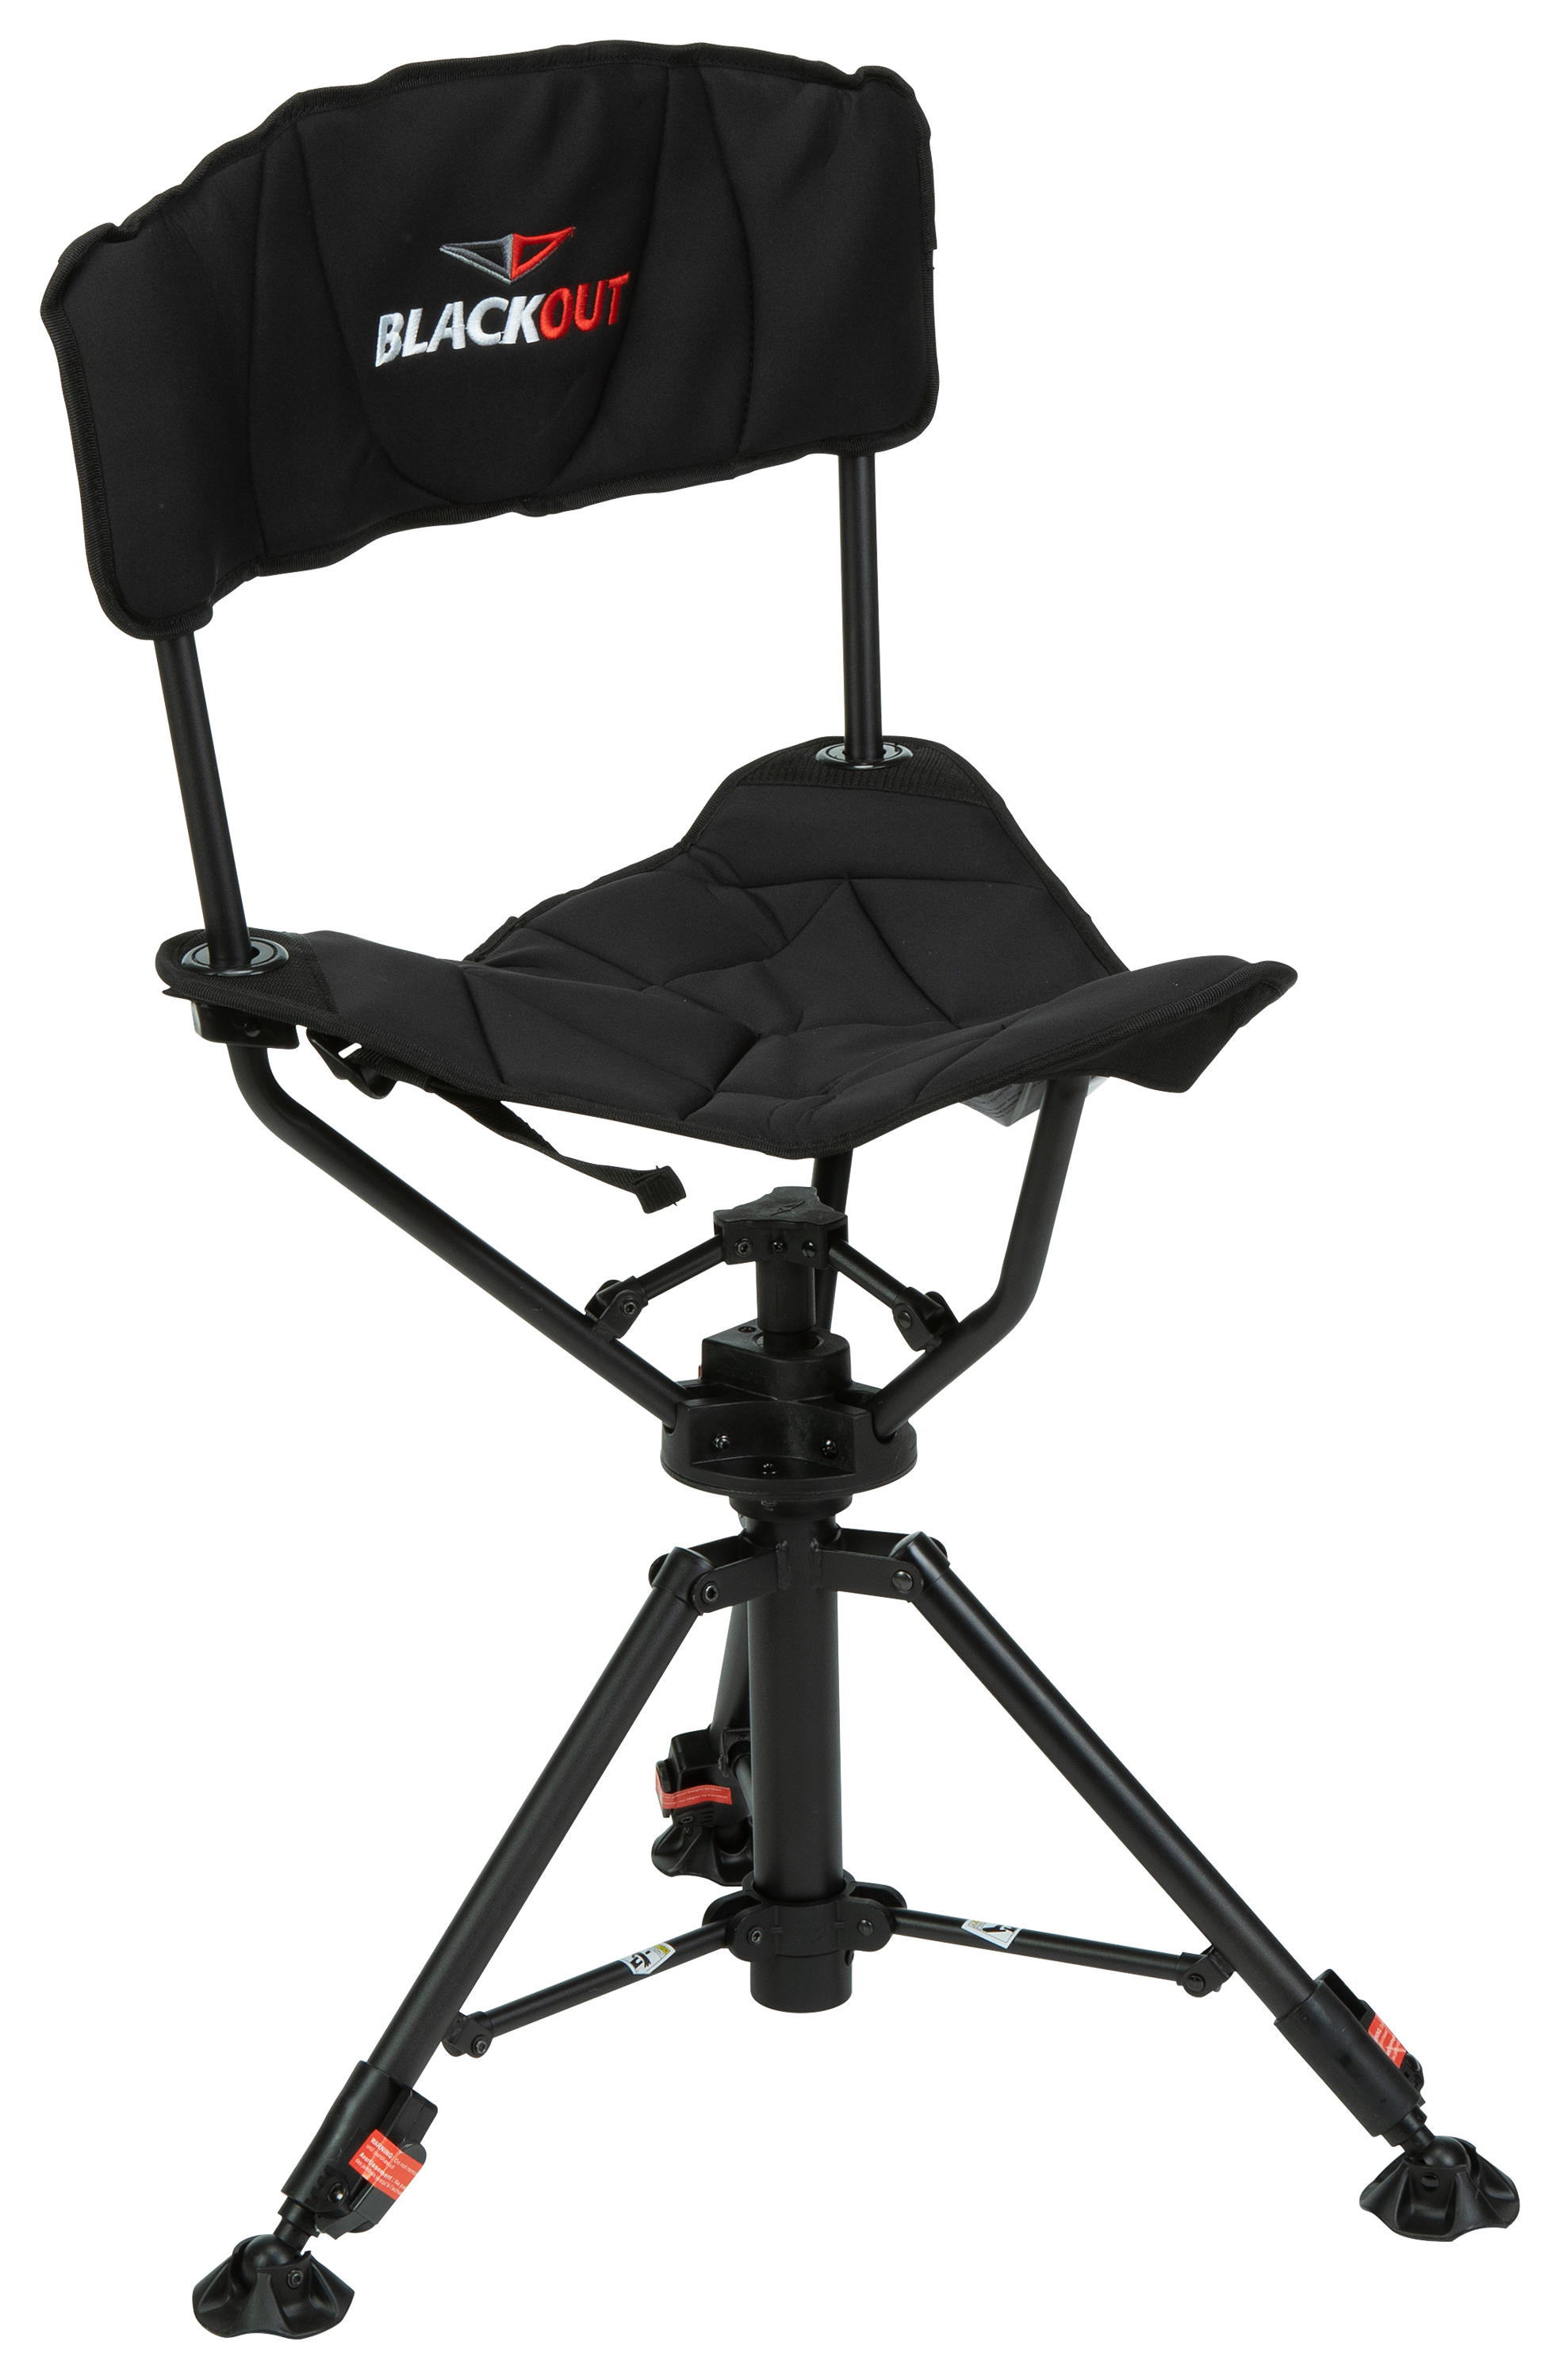 360° Folding Swivel Hunting Chair Blind Chair Stool Tripod For